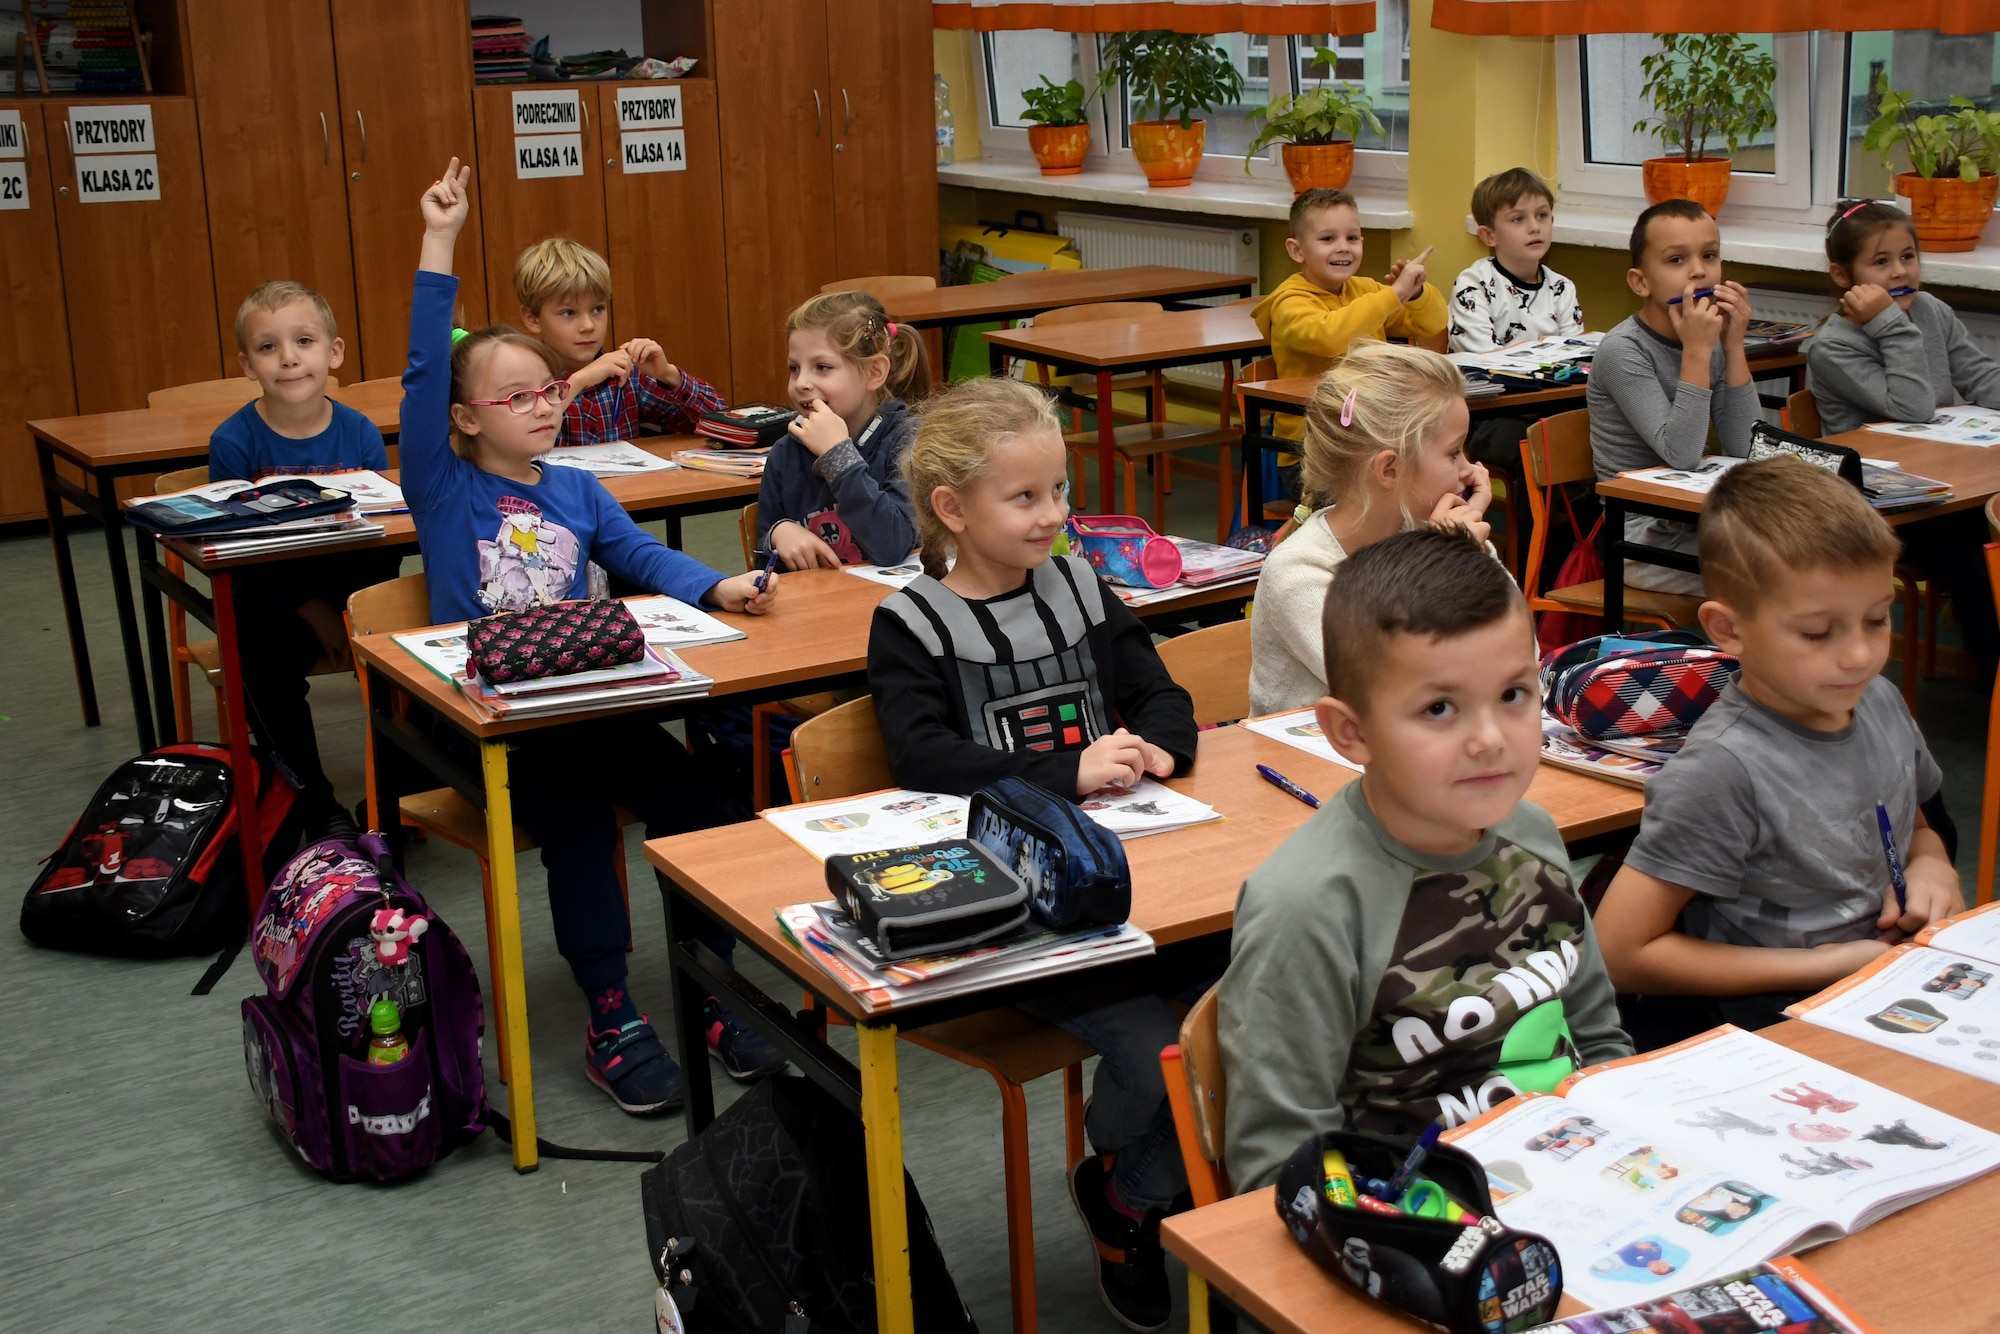 Students at Elementary School No. Nine in Gniezno, Poland, participate in a classroom discussion with members of the 94th Airlift Wing, Dobbins Air Reserve Base, Georgia, and the 86th Airlift Wing, Ramstein Air Base, Germany, Oct. 19, 2016. The Airmen made a cultural orientation visit to the school while the two units are working with the Polish air force during Aviation Detachment 17-1 in support of Operation Atlantic Resolve. (U.S. Air Force photo by Staff Sgt. Alan Abernethy)